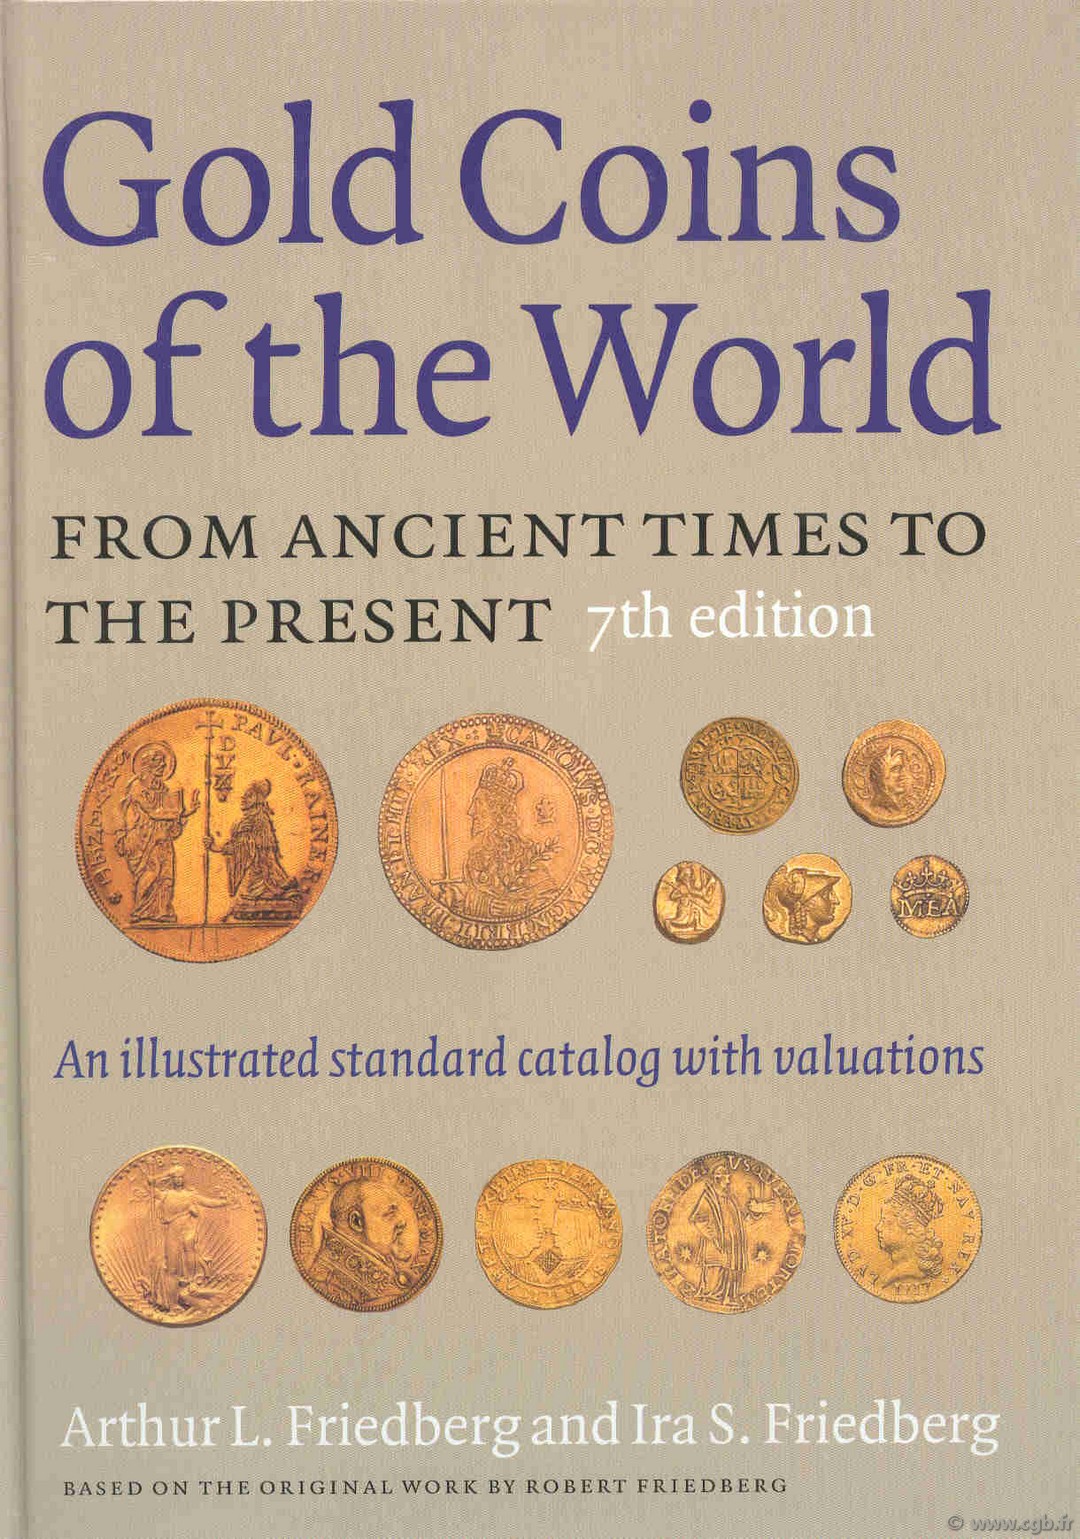 Gold Coins of the World from Ancient Times to the Present, 7th edition  FRIEDBERG Arthur L., FRIEDBERG Ira S.